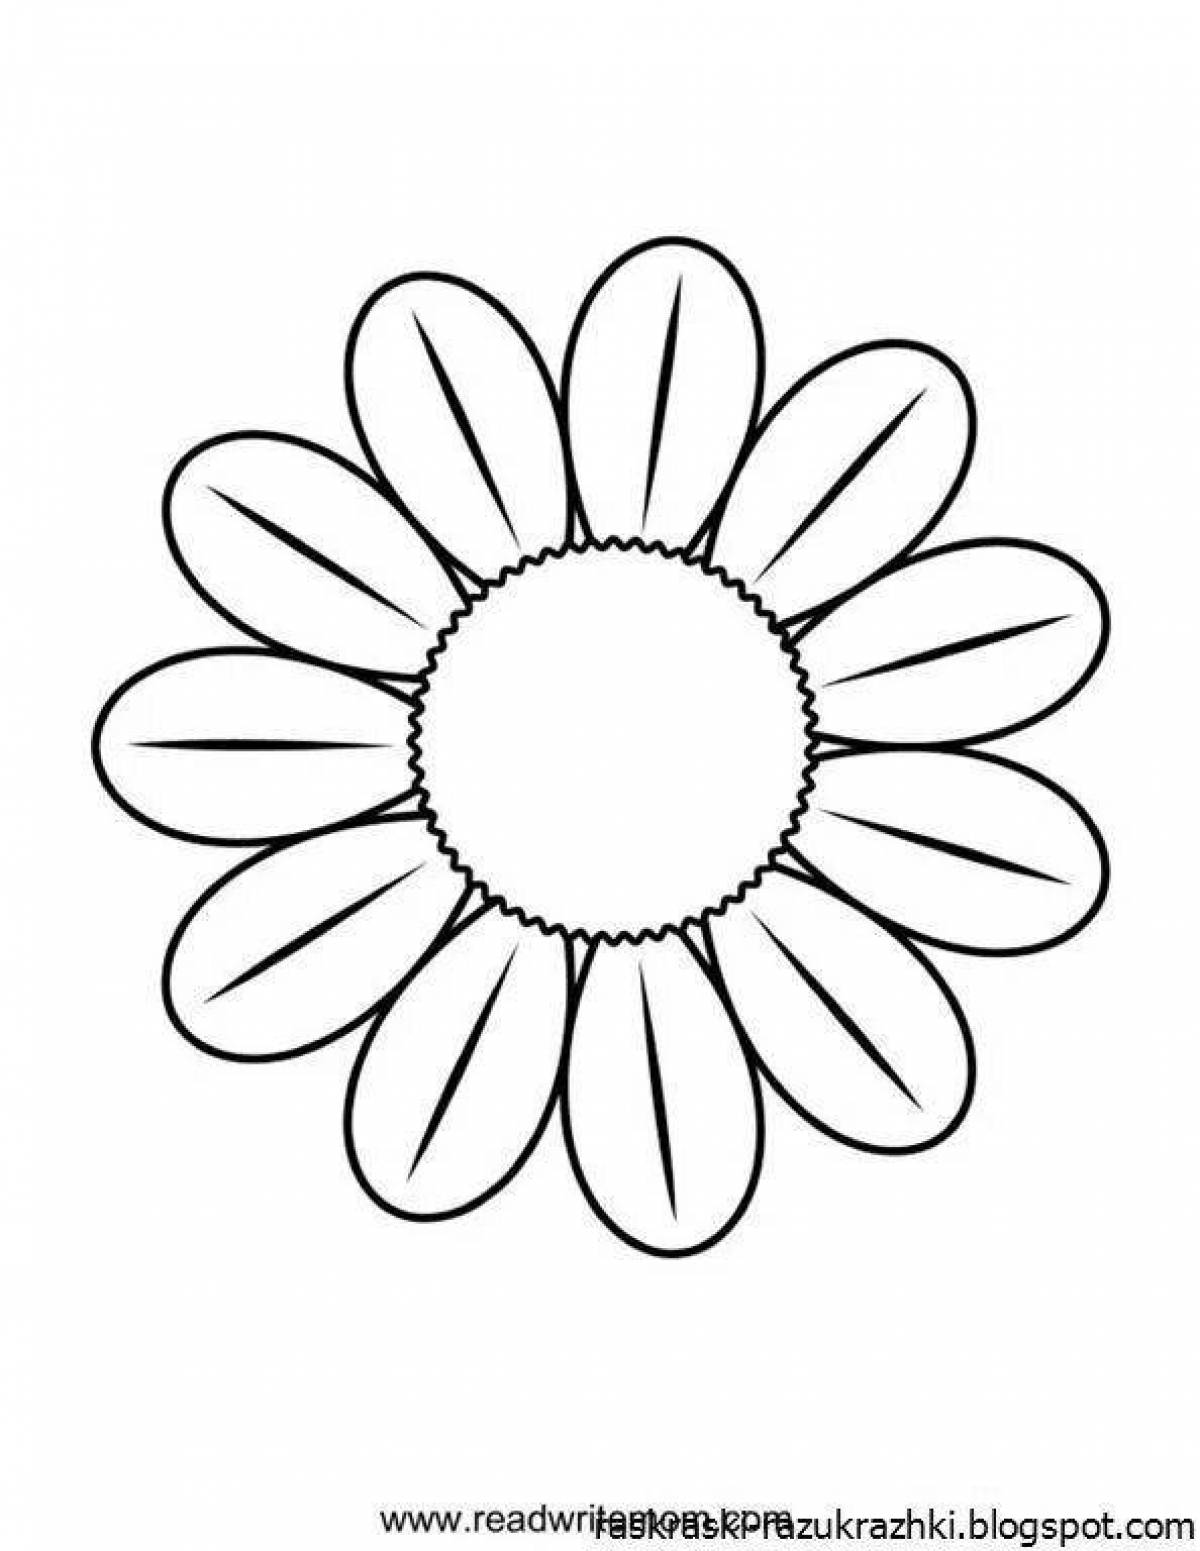 Coloring page charming chamomile flower